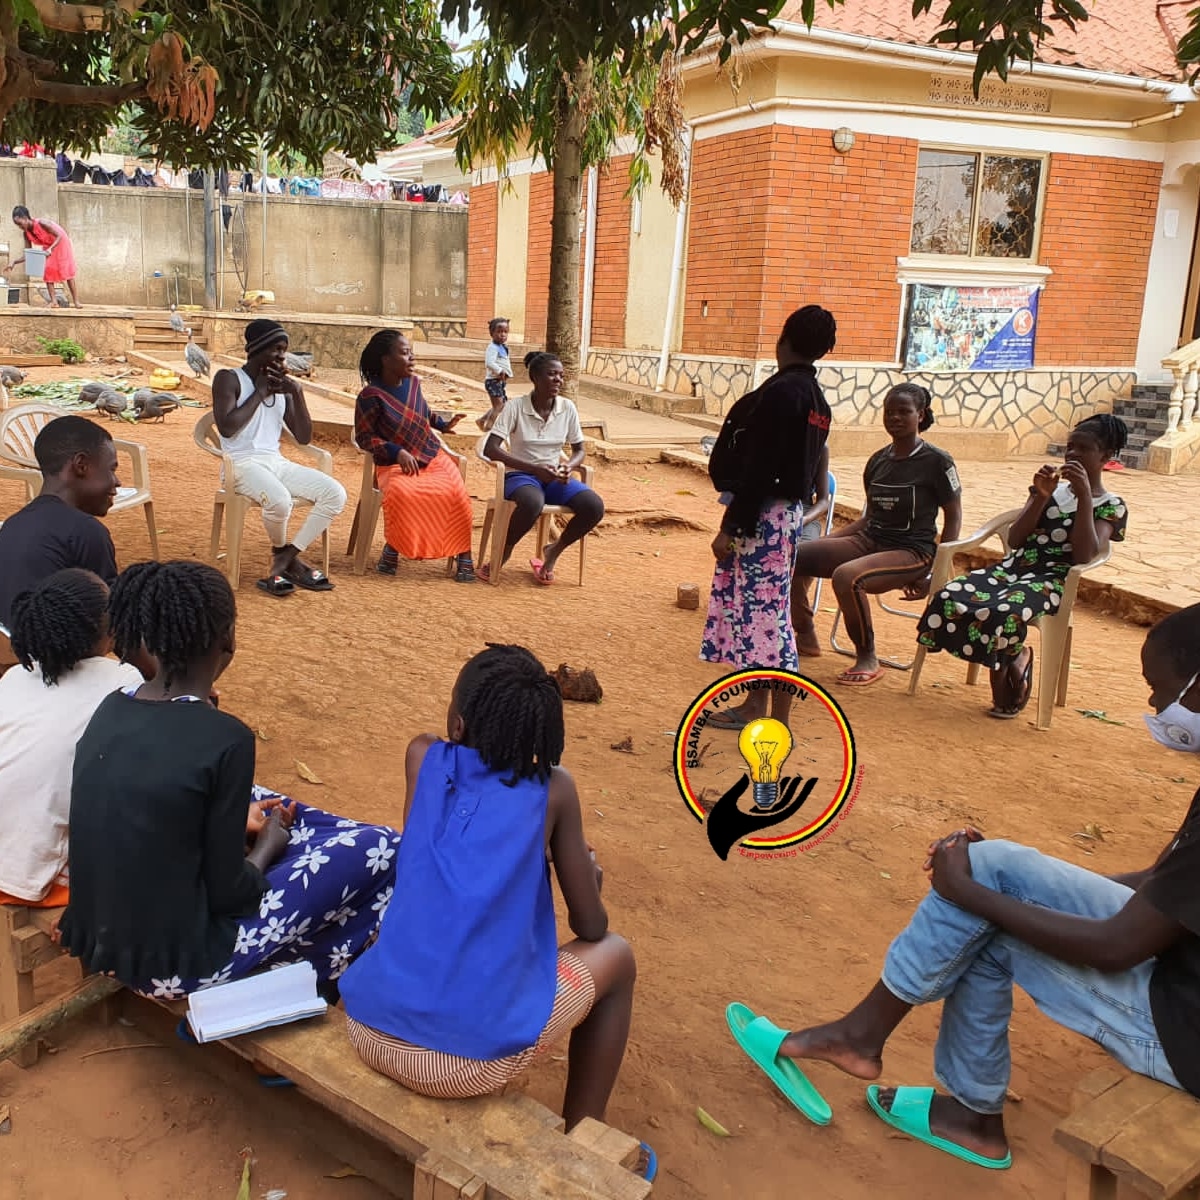 Learning through stories. Story reading and listening has a way of widening a child's imagination.

Volunteer, donate, fundraise.

office@ssamba.org
ssamba.org

#ugandavolunteerprogram #freevolunteering #volunteeruganda #volunteeringuganda #teachabroad #teachinuganda